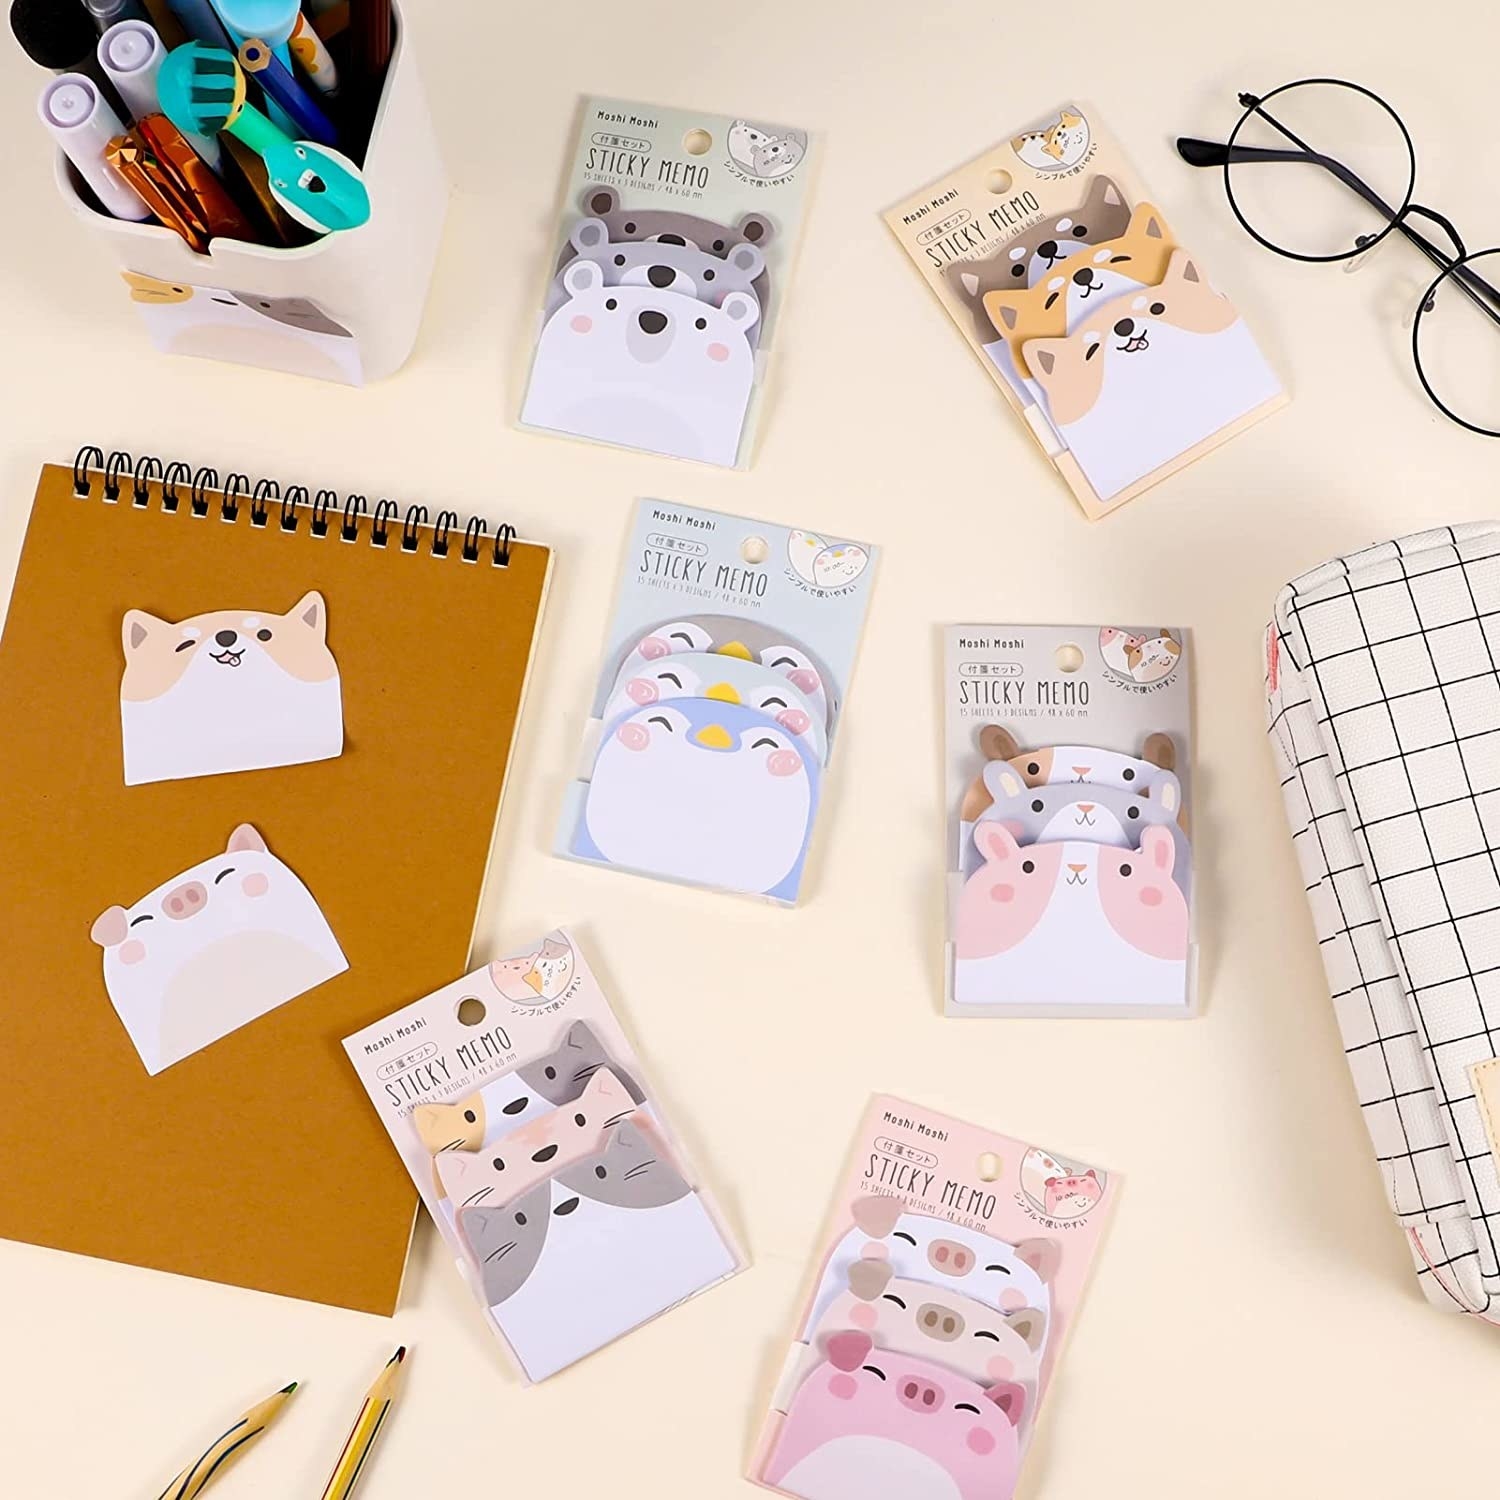 the cute notepads